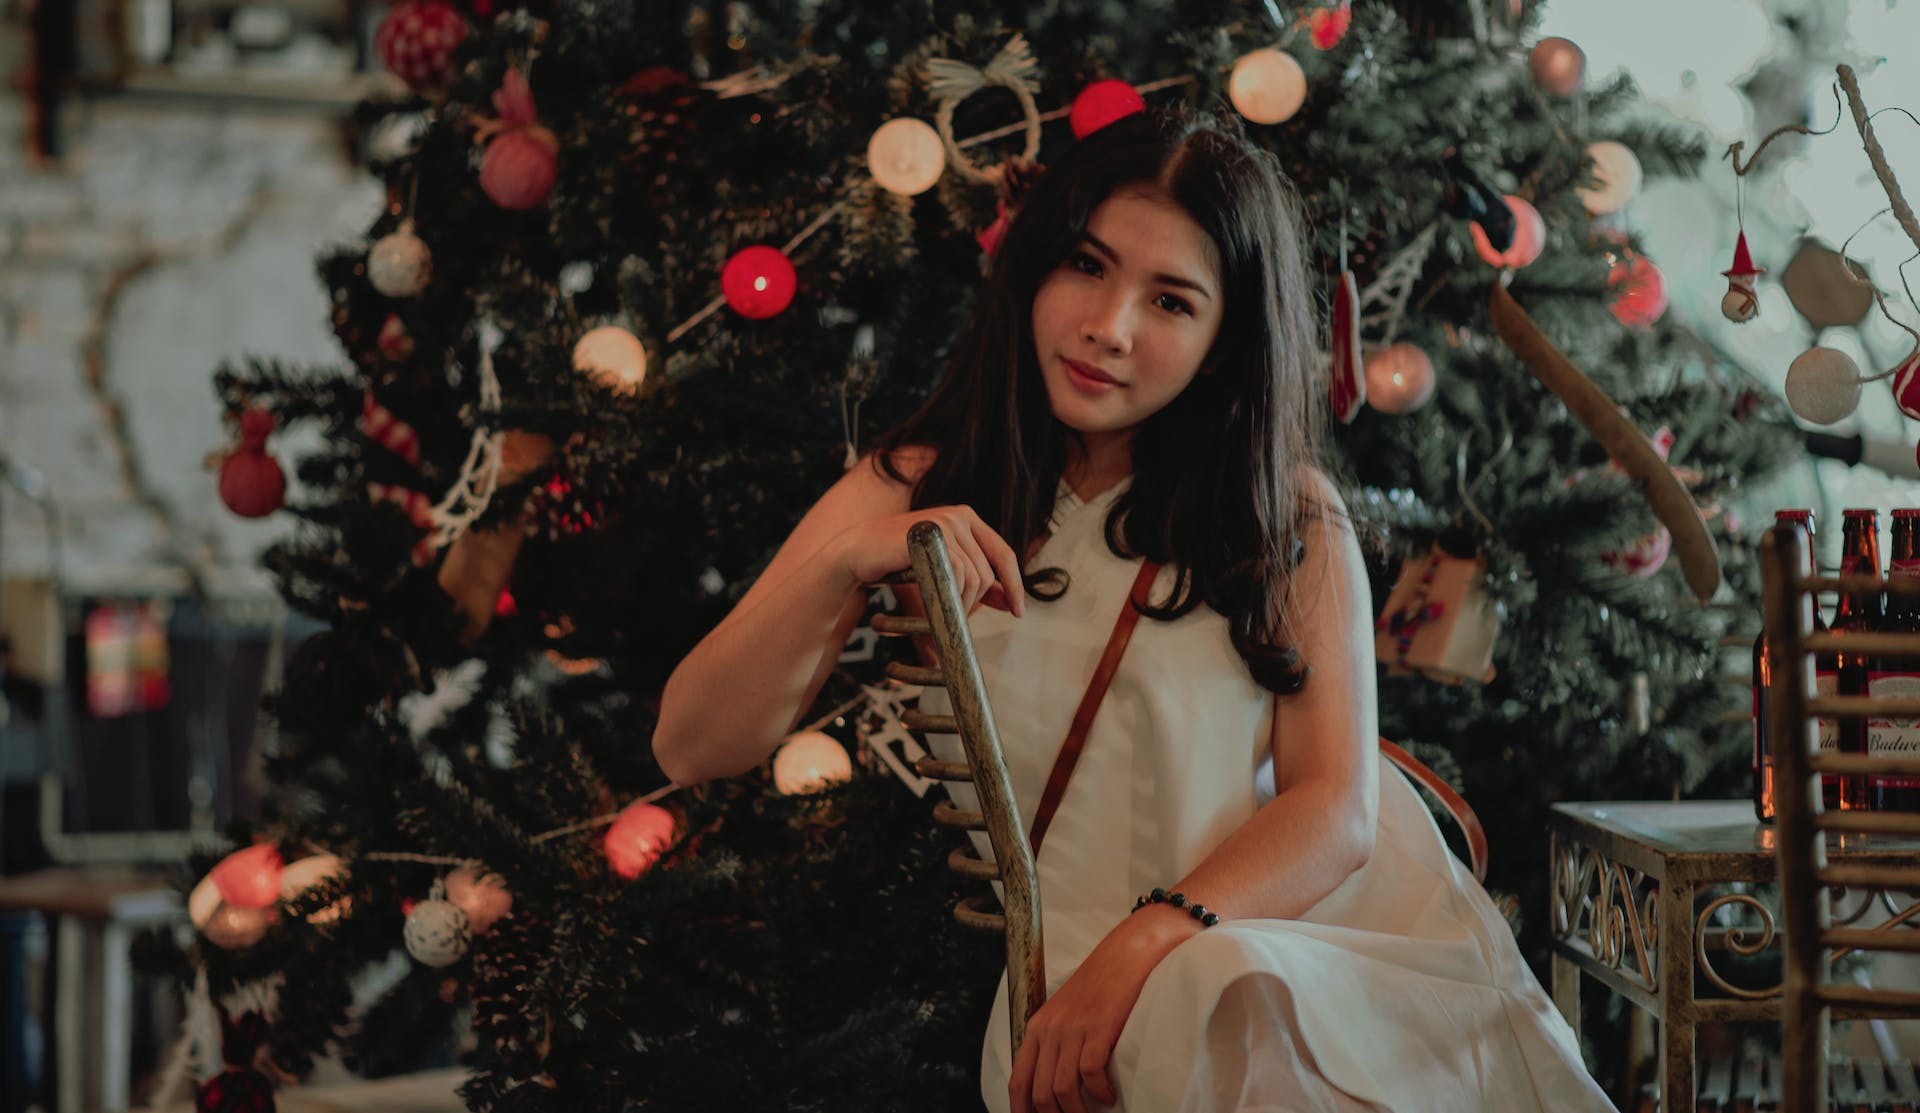 A woman sitting in front of a Christmas tree. | Source: Pexels